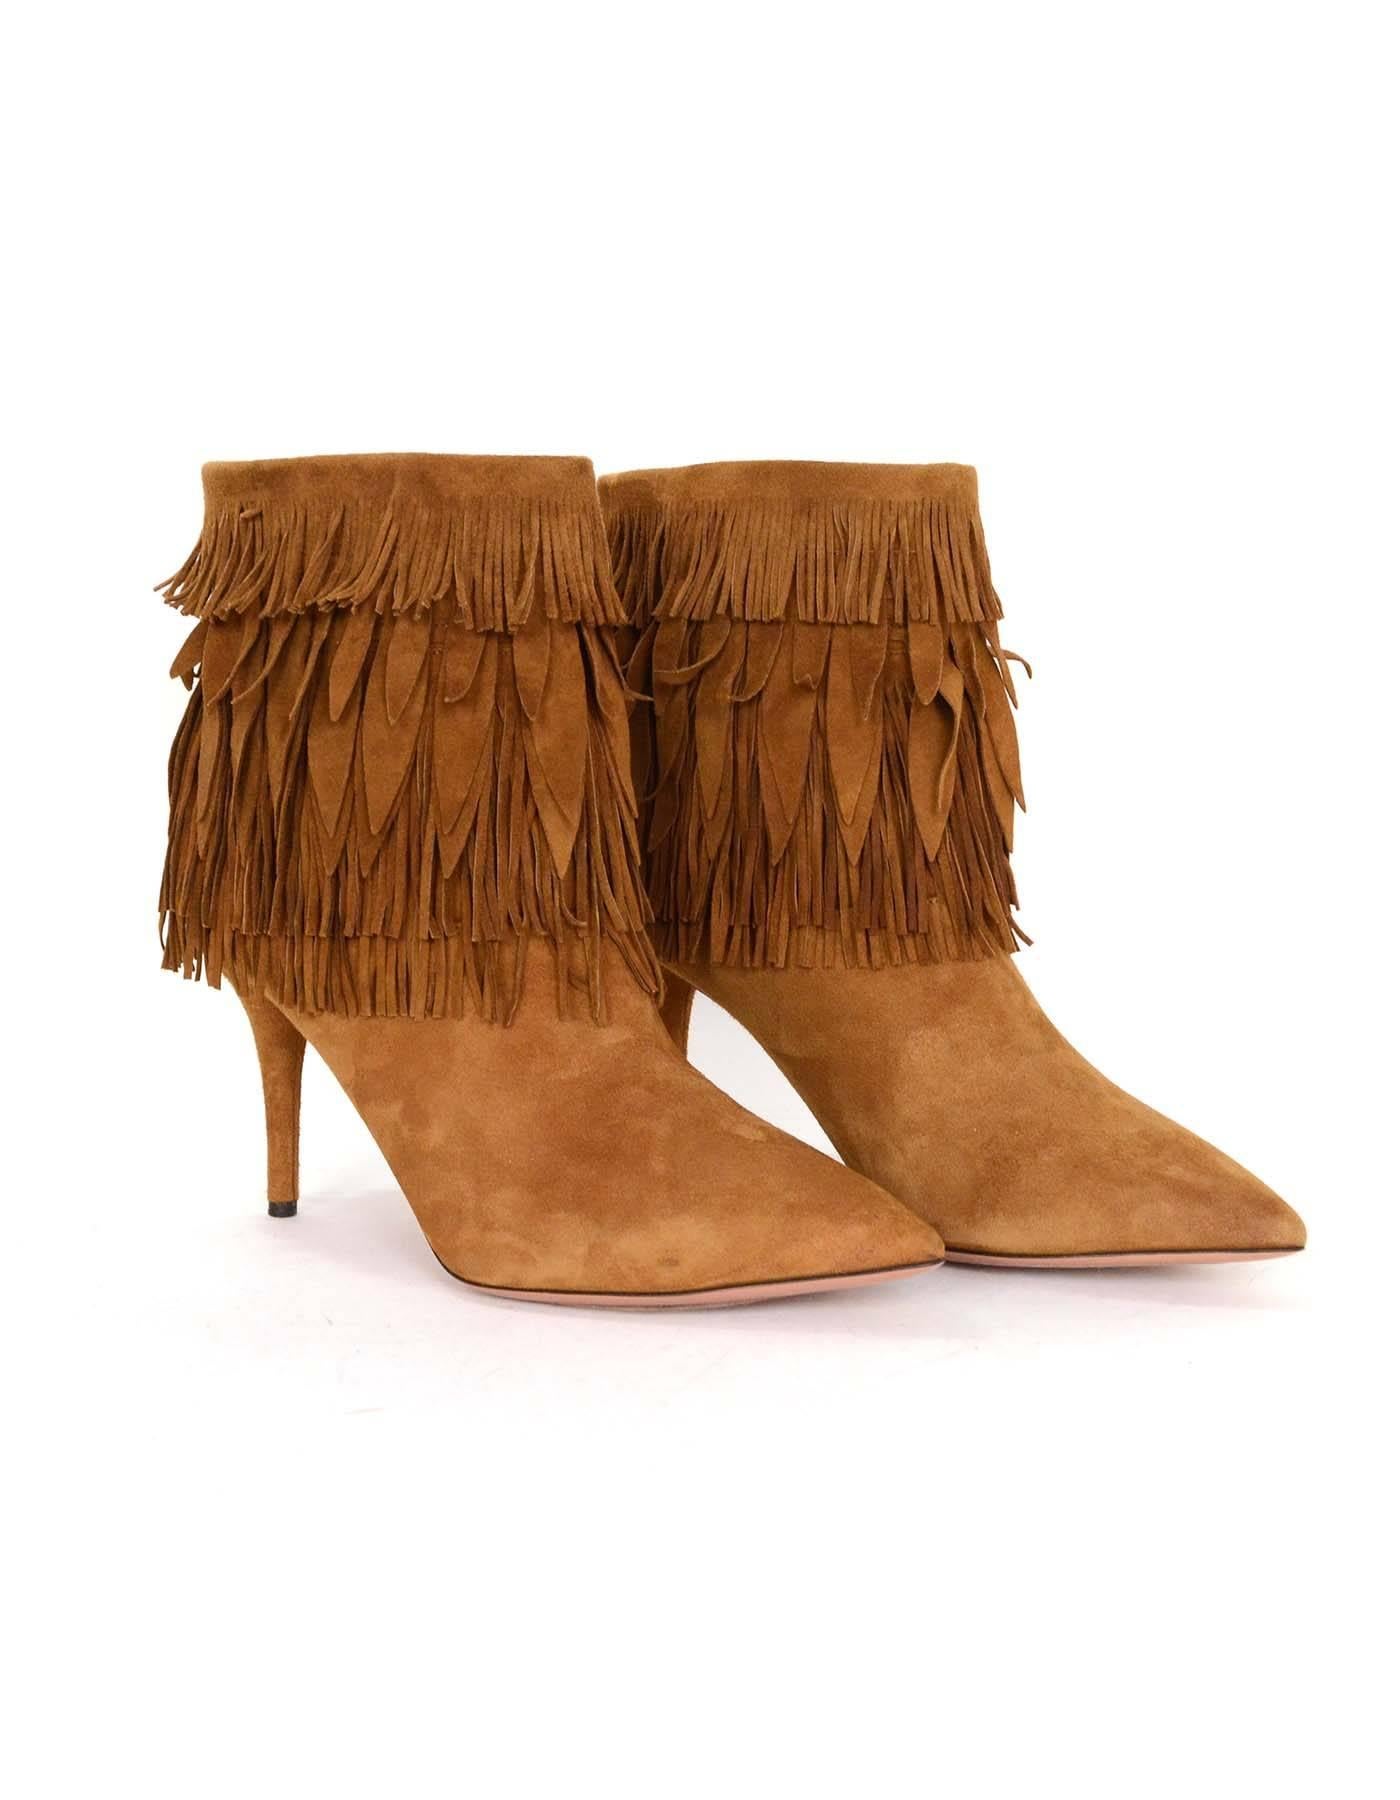 Aquazzura Tan Suede Fringe Ankle Booties sz 38 In Excellent Condition In New York, NY